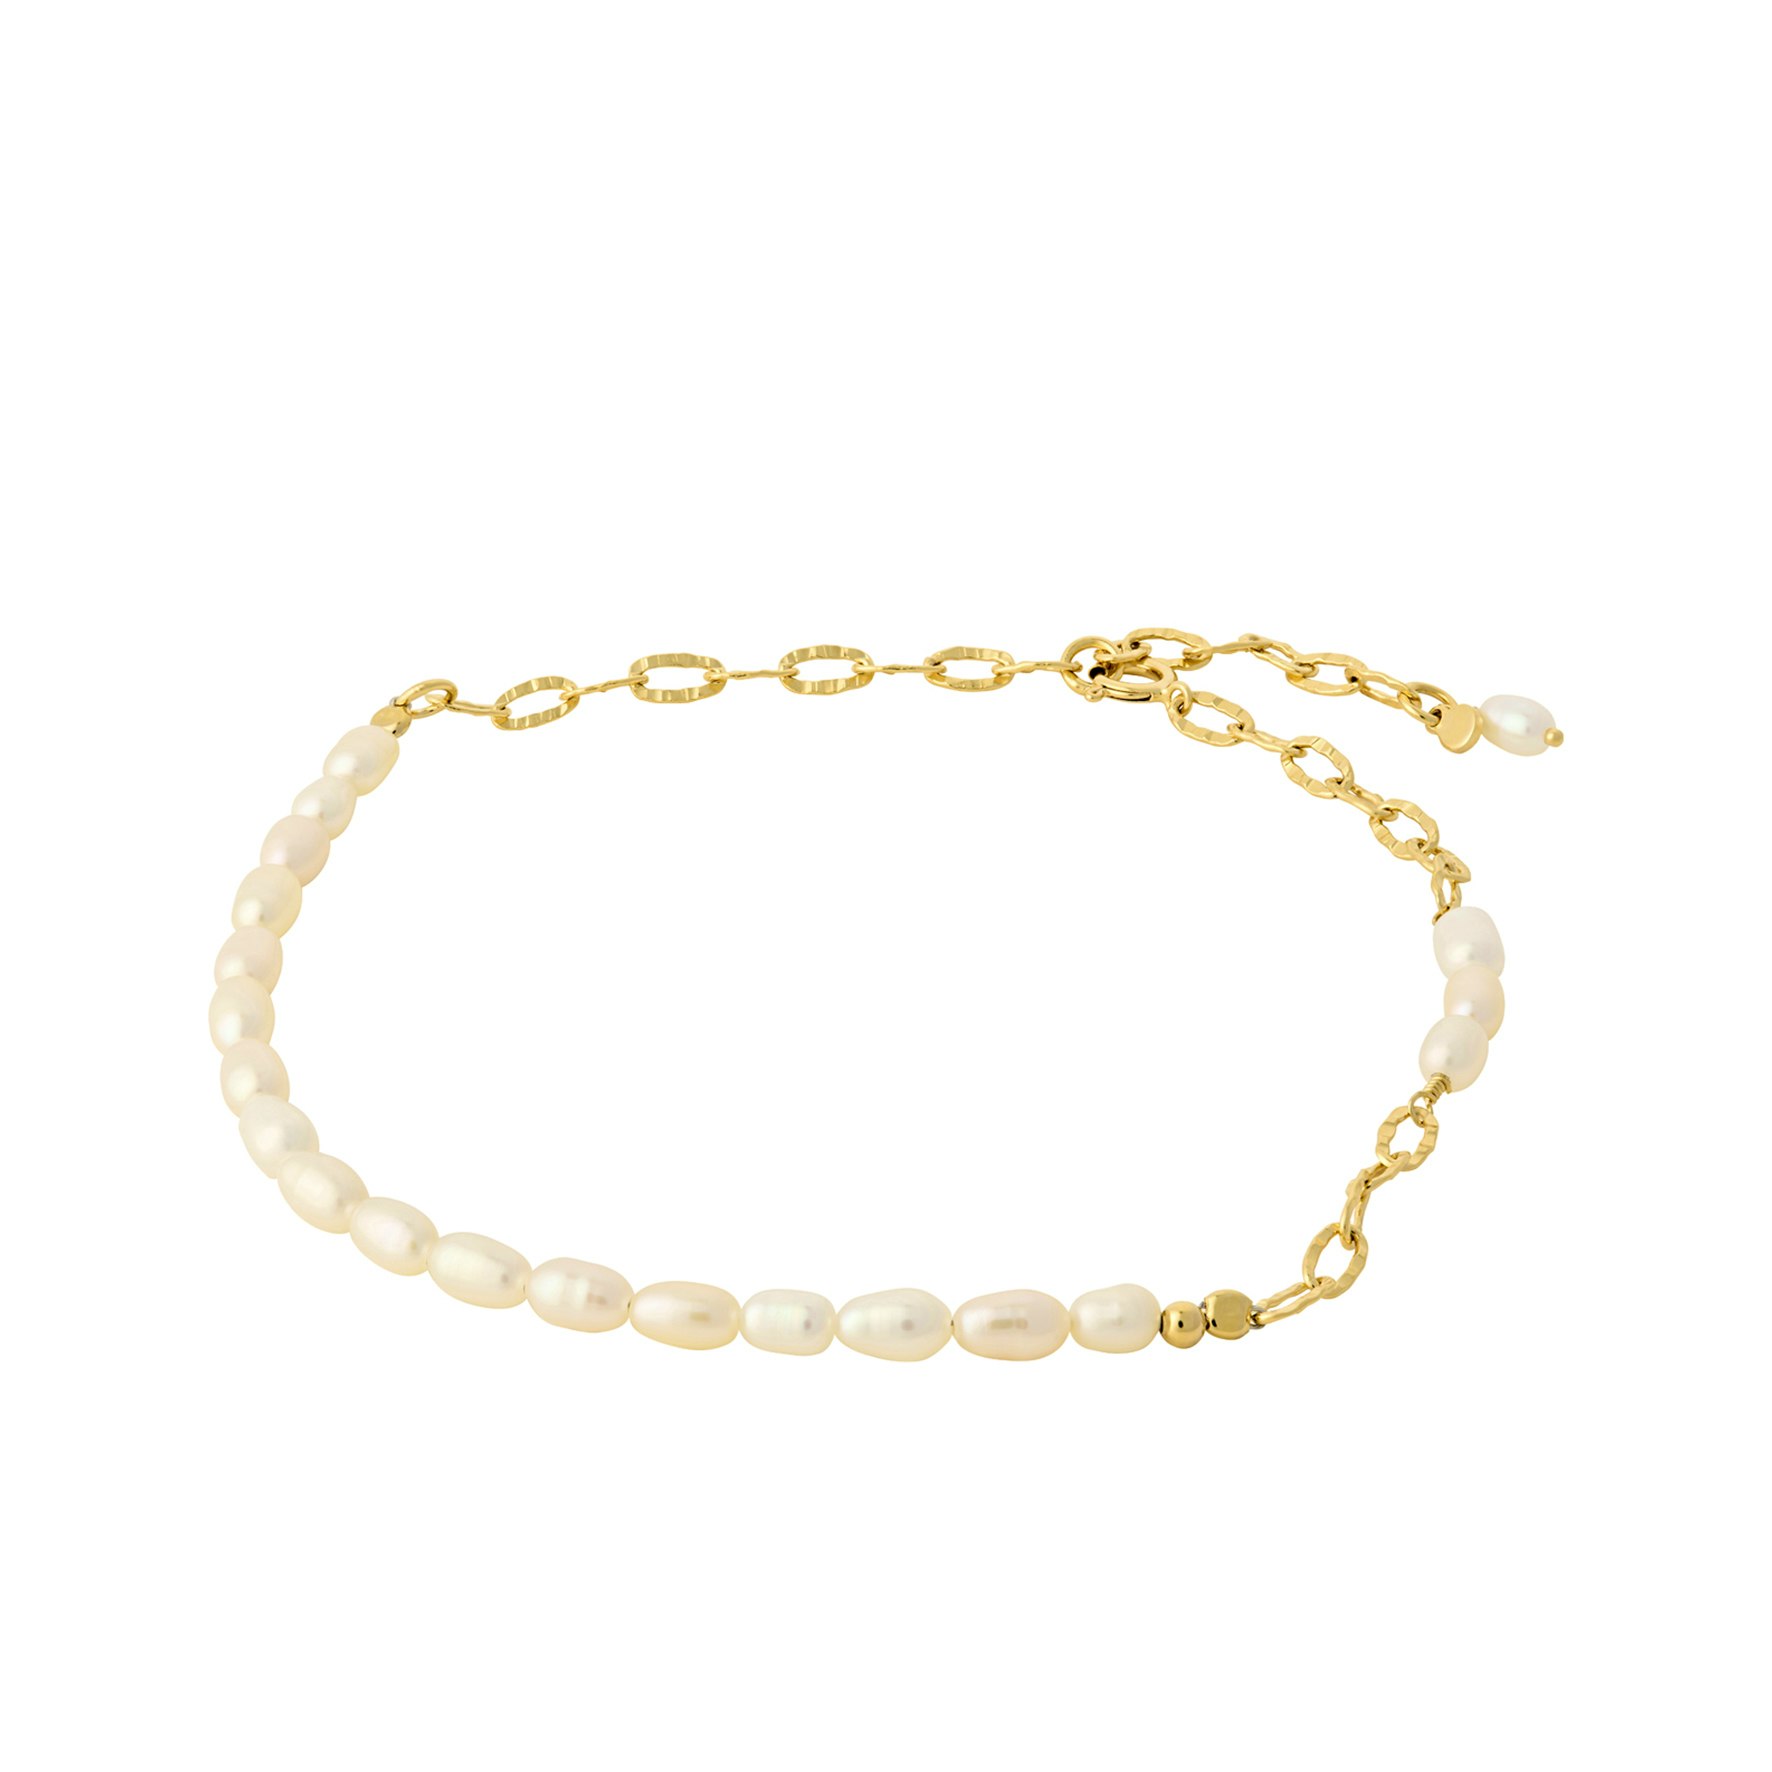 Seaside Anklet from Pernille Corydon in Goldplated Silver Sterling 925